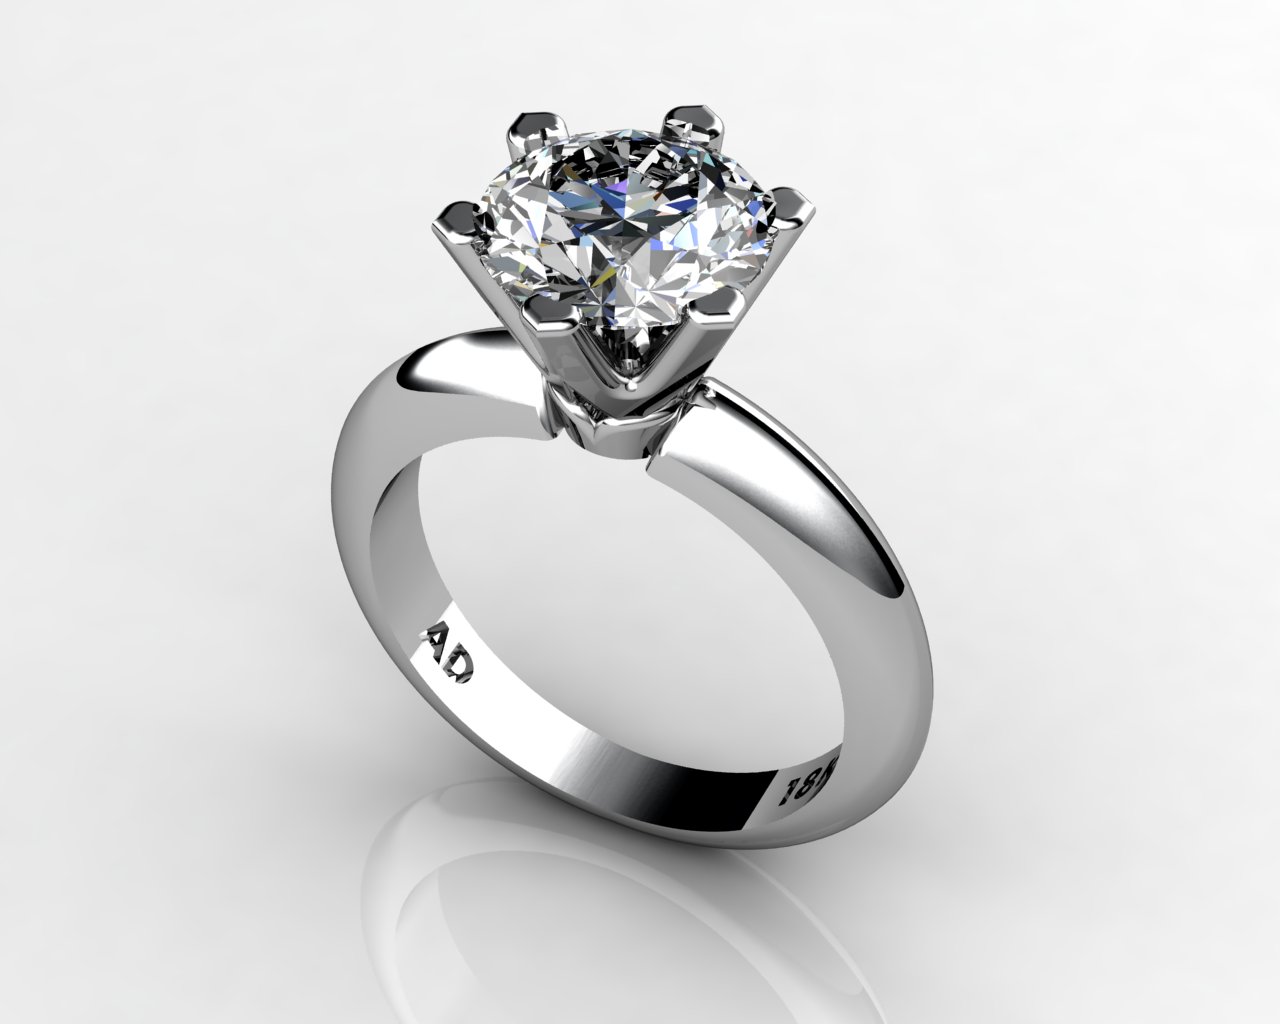 Diamond Solitaire Engagement Ring Round Cut 2.50ct Diamond 6 PRONGS 6gr 18kt White Gold - South Bay Gold Torrance